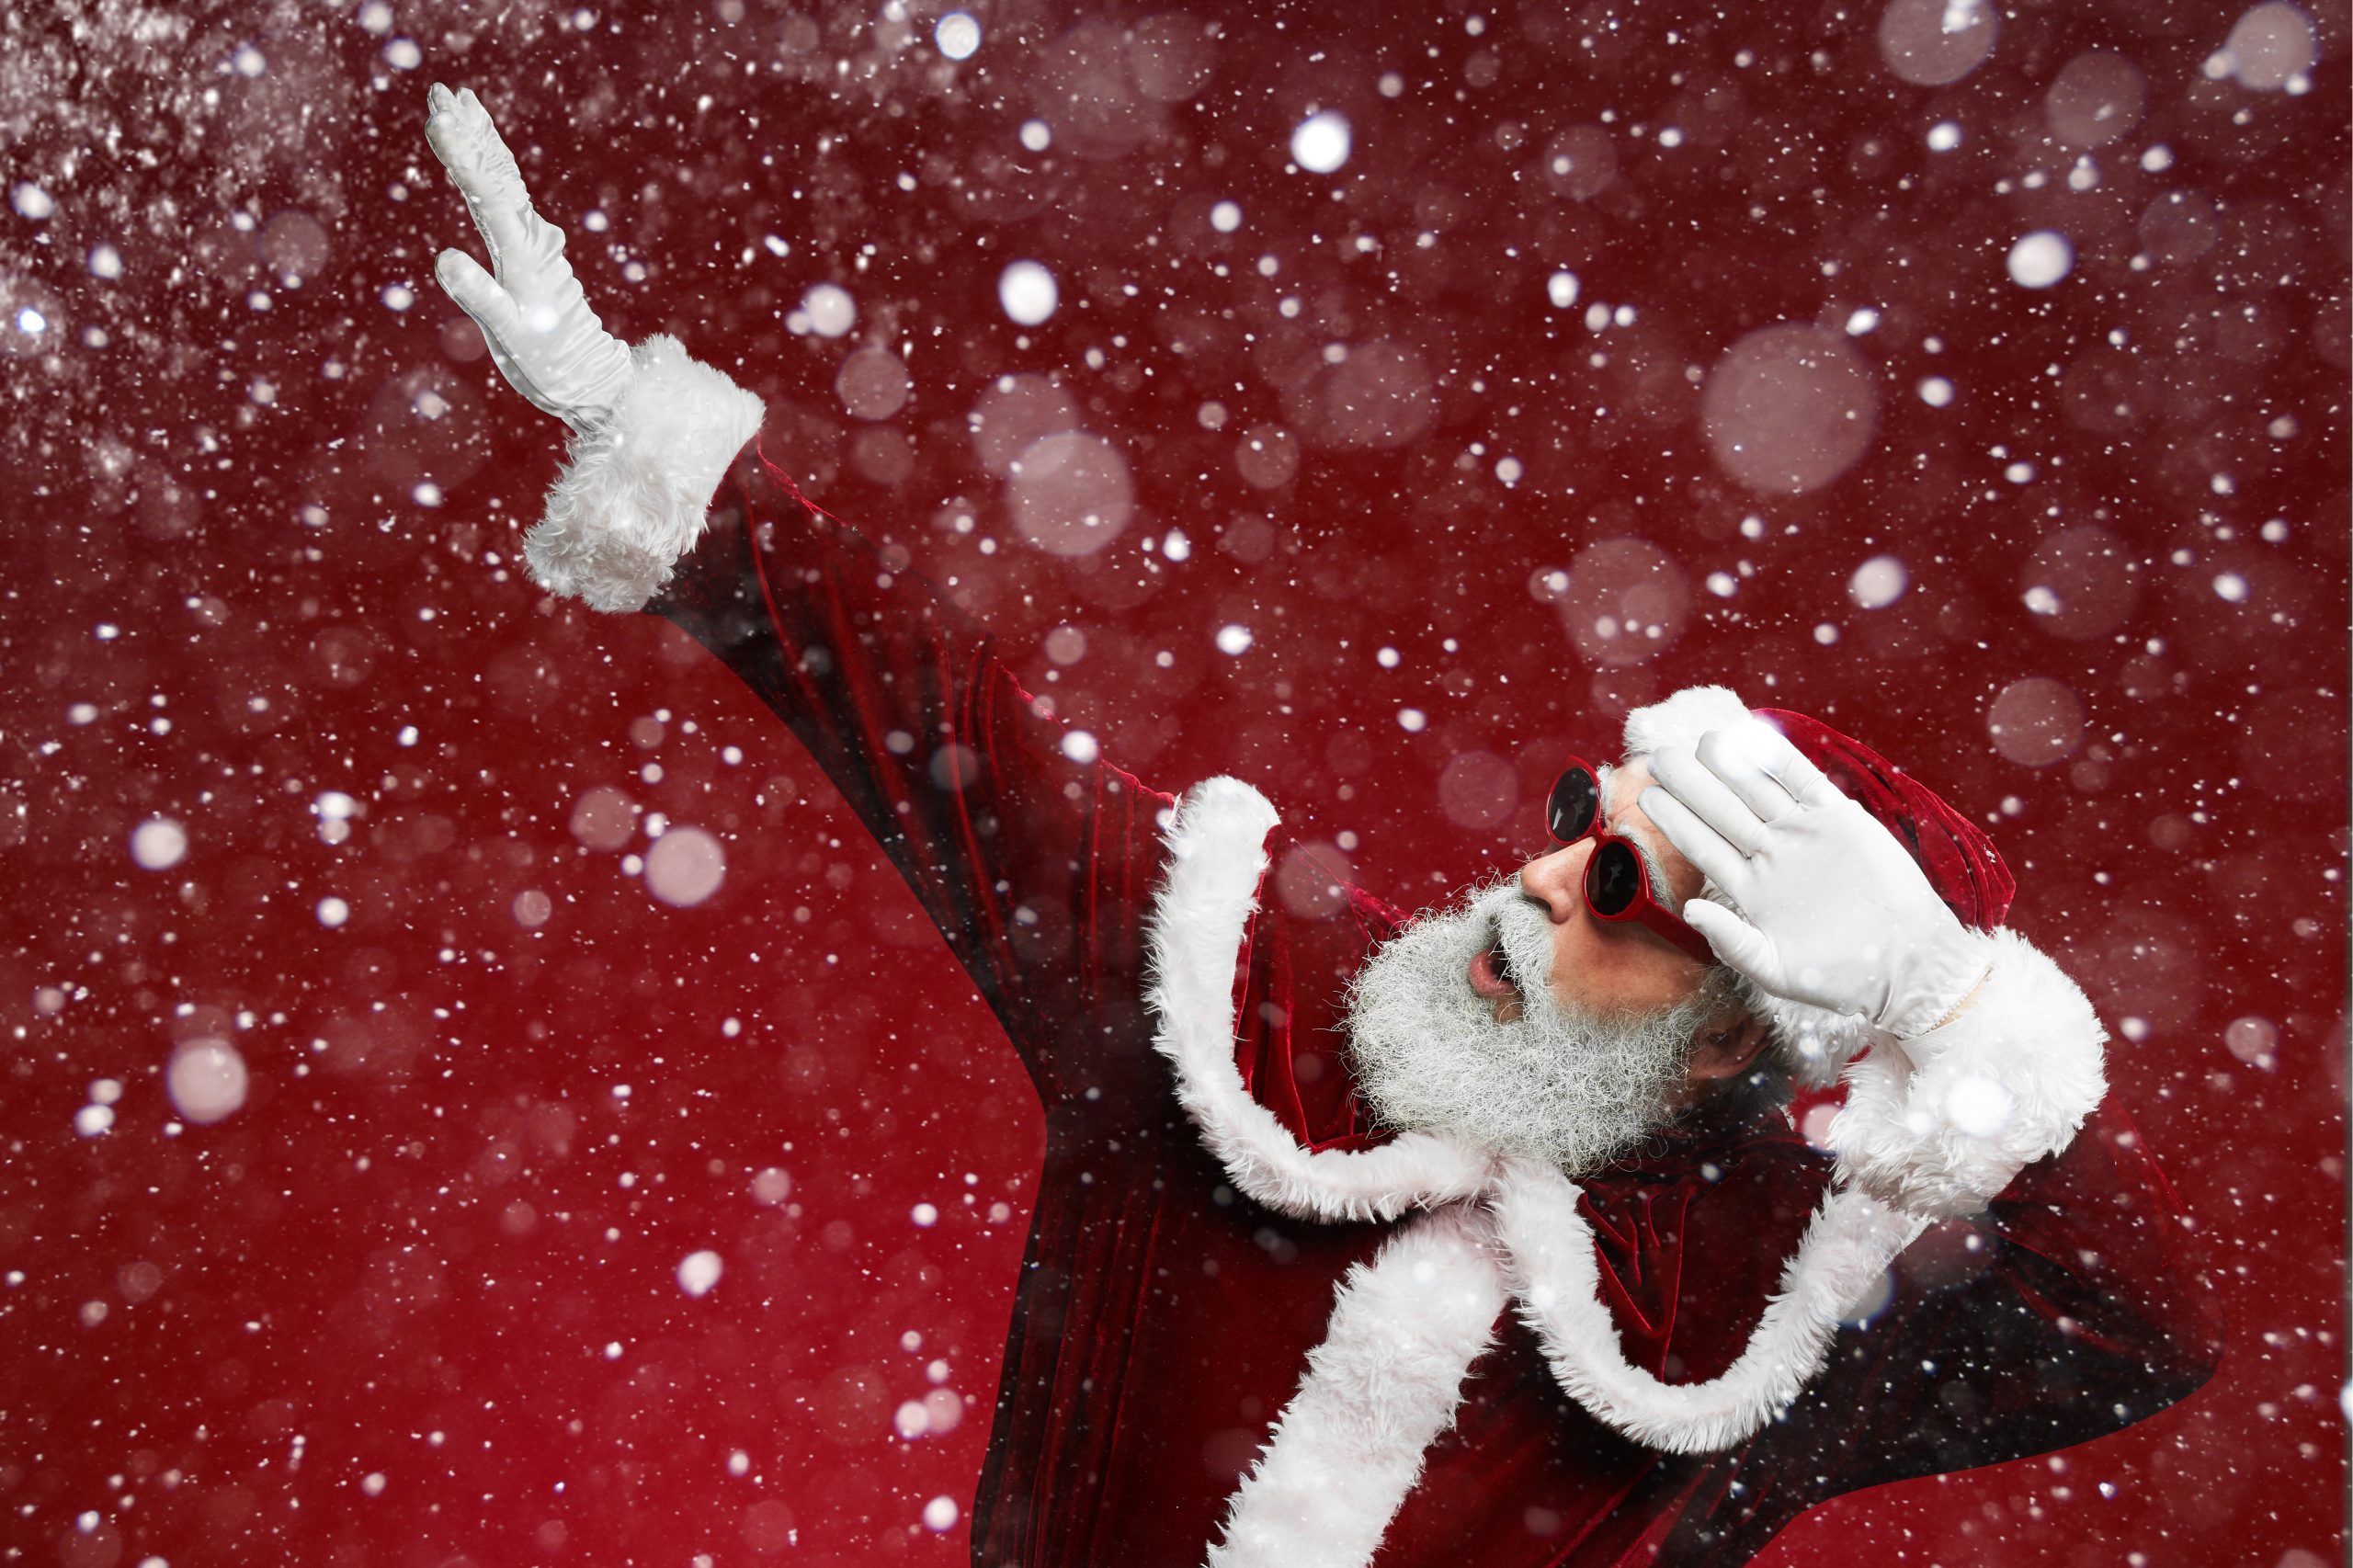 Waist up portrait of funky Santa dancing over red background with snow falling